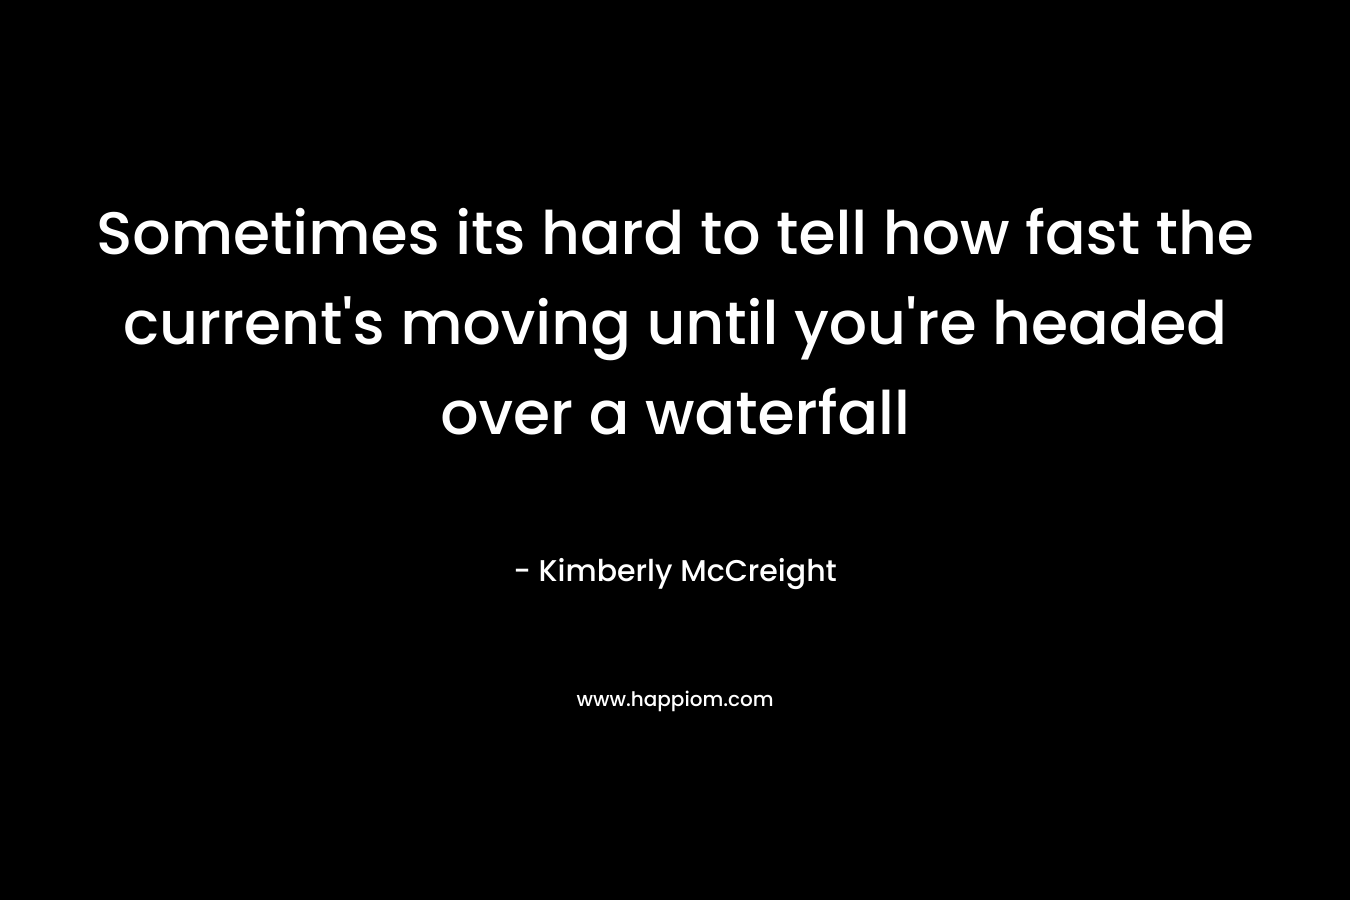 Sometimes its hard to tell how fast the current’s moving until you’re headed over a waterfall – Kimberly McCreight